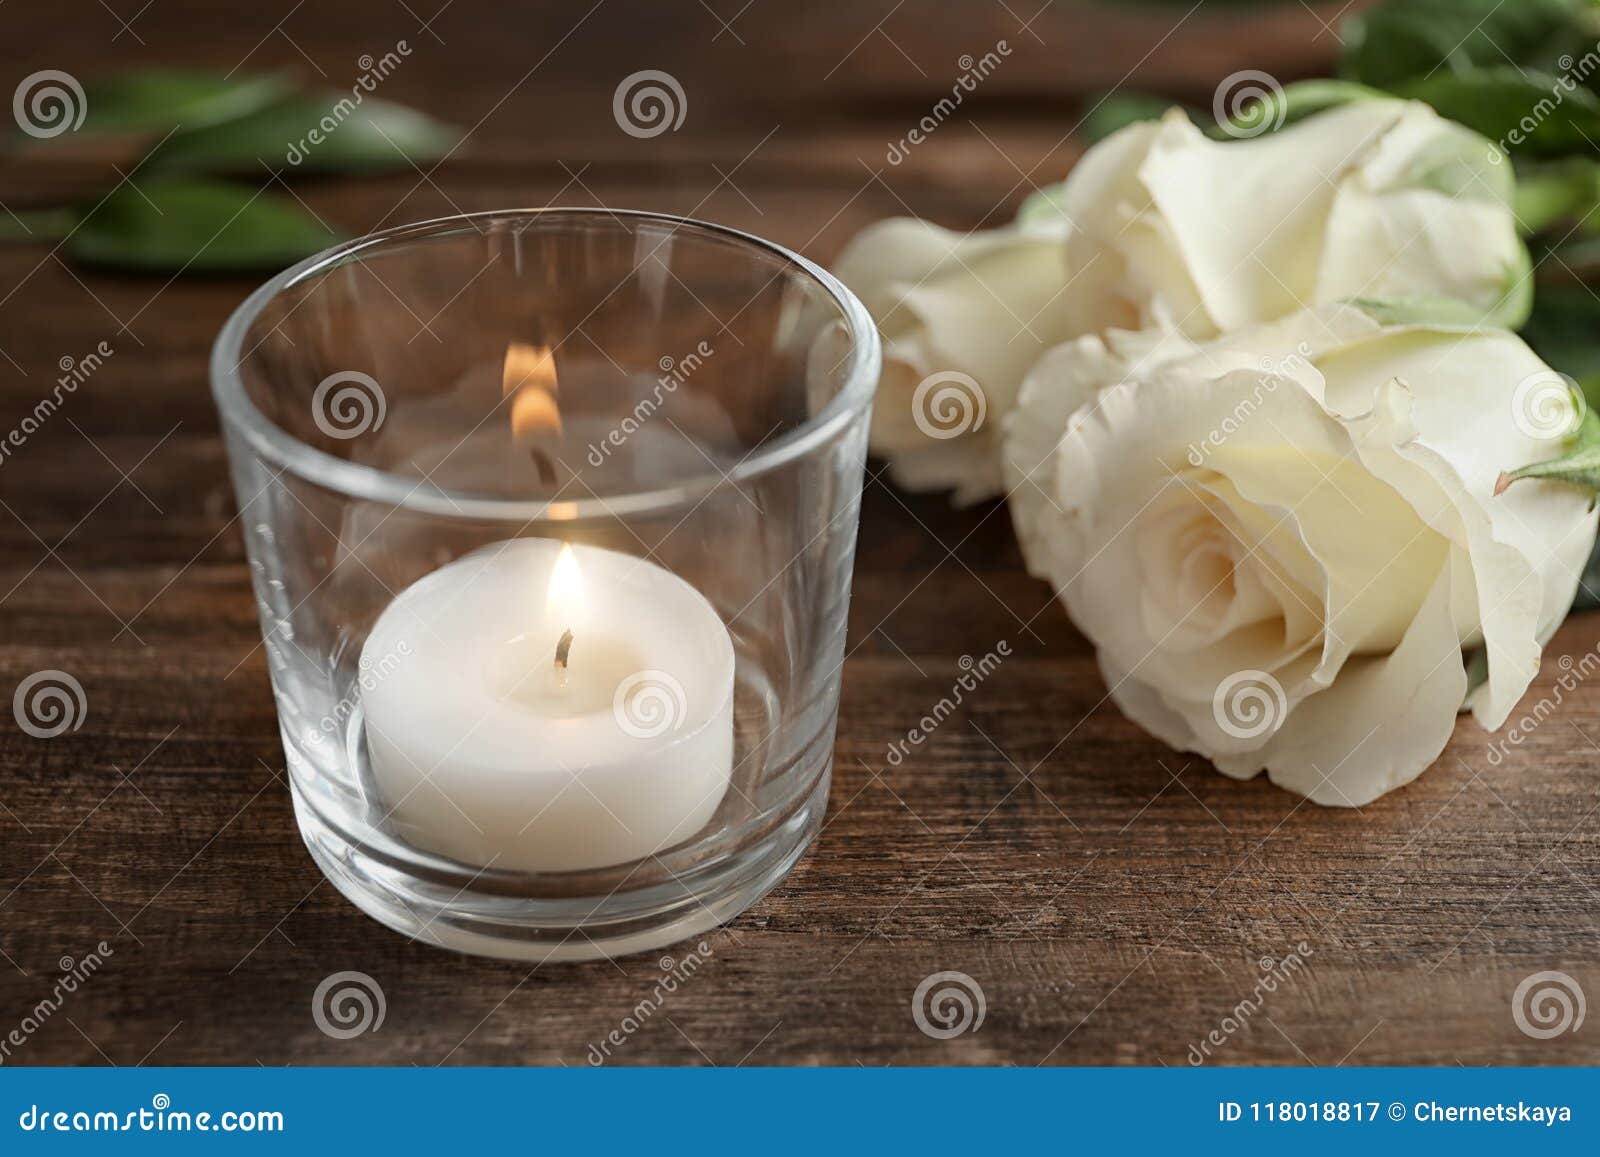 Glass Holder With Burning Wax Candle Near Roses On Wooden